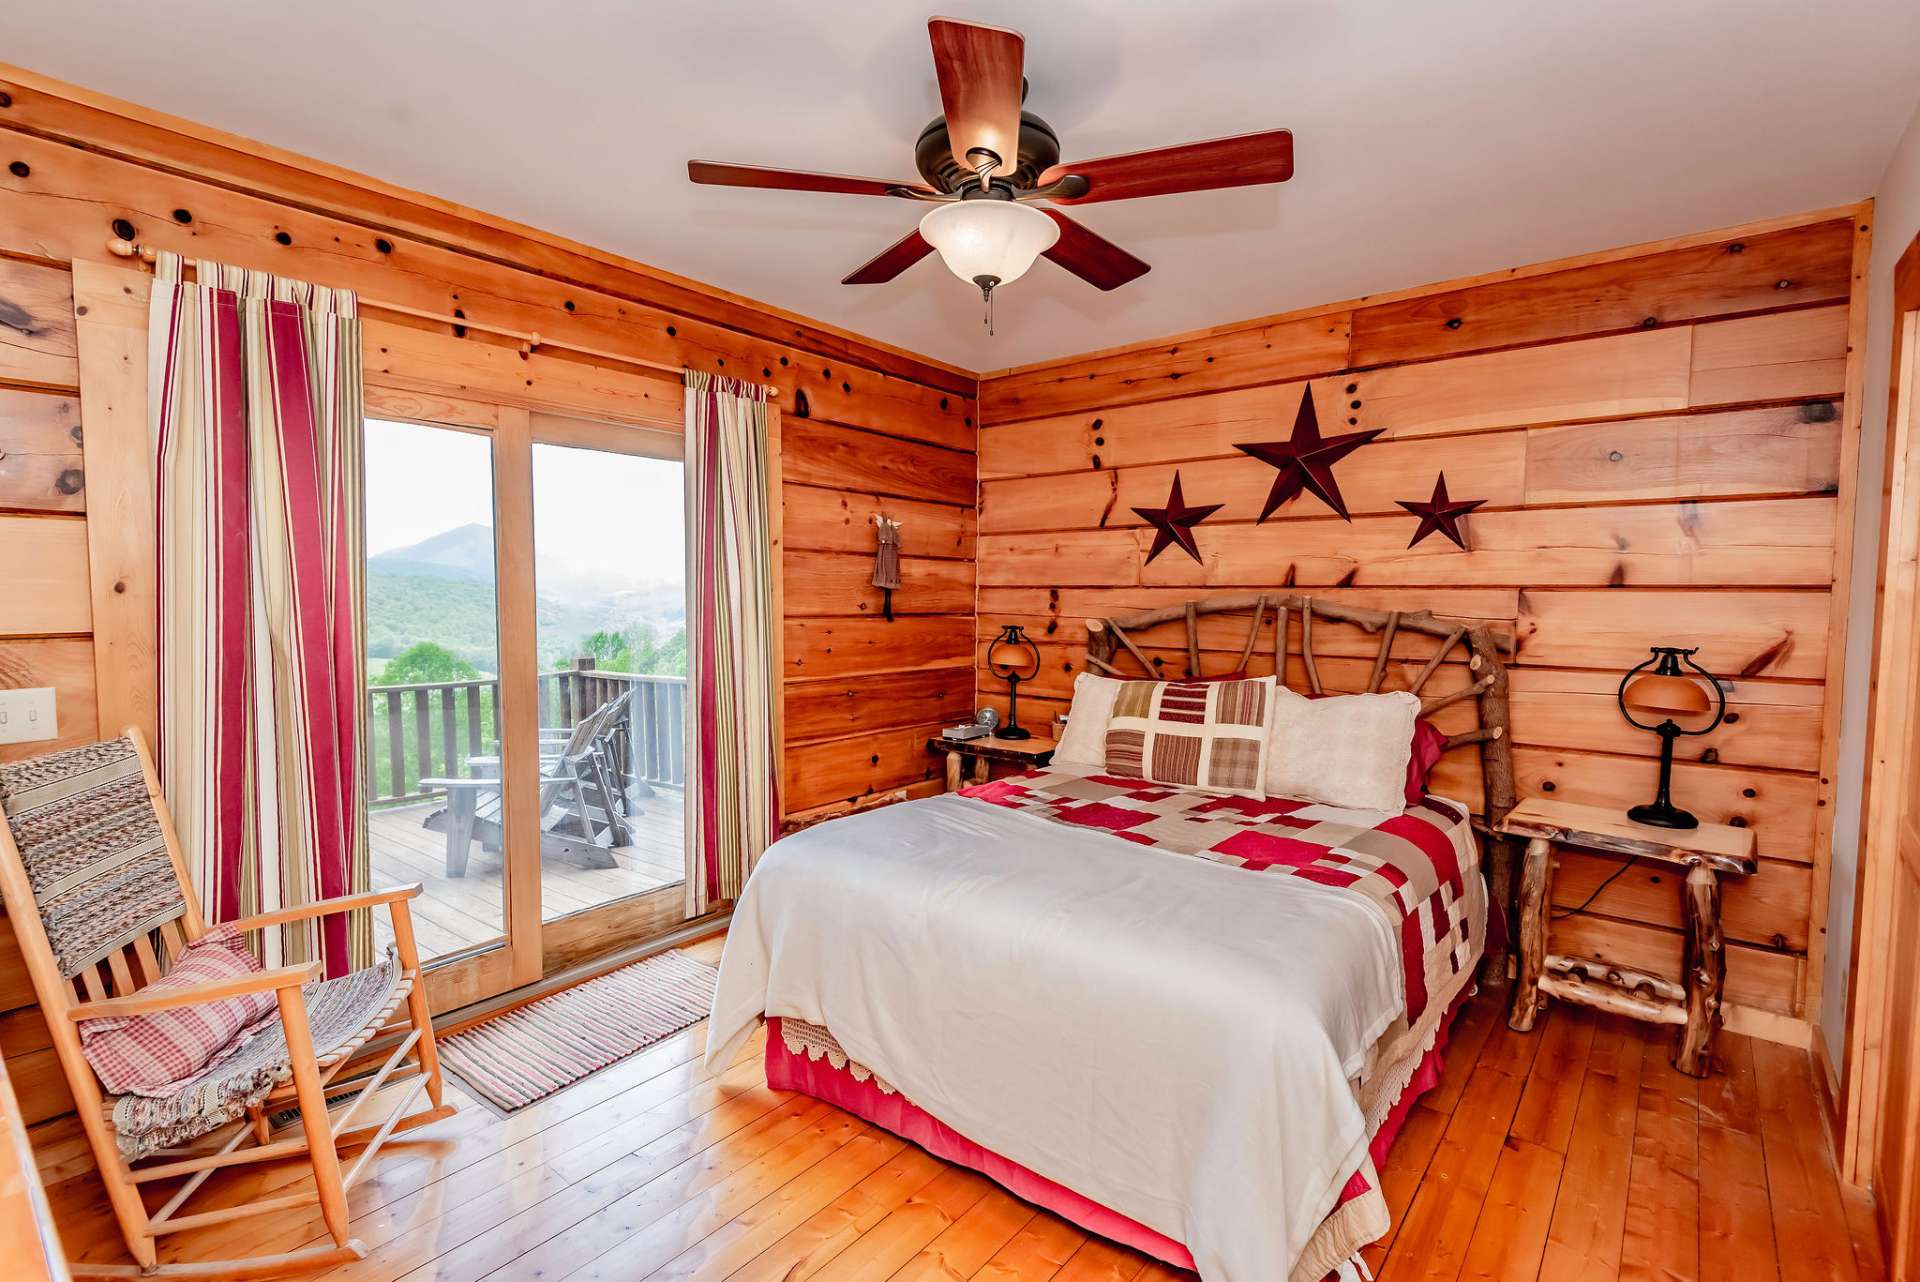 You will enjoy the convenience of main level living.  The master suite offers a private bath and private access to the deck.